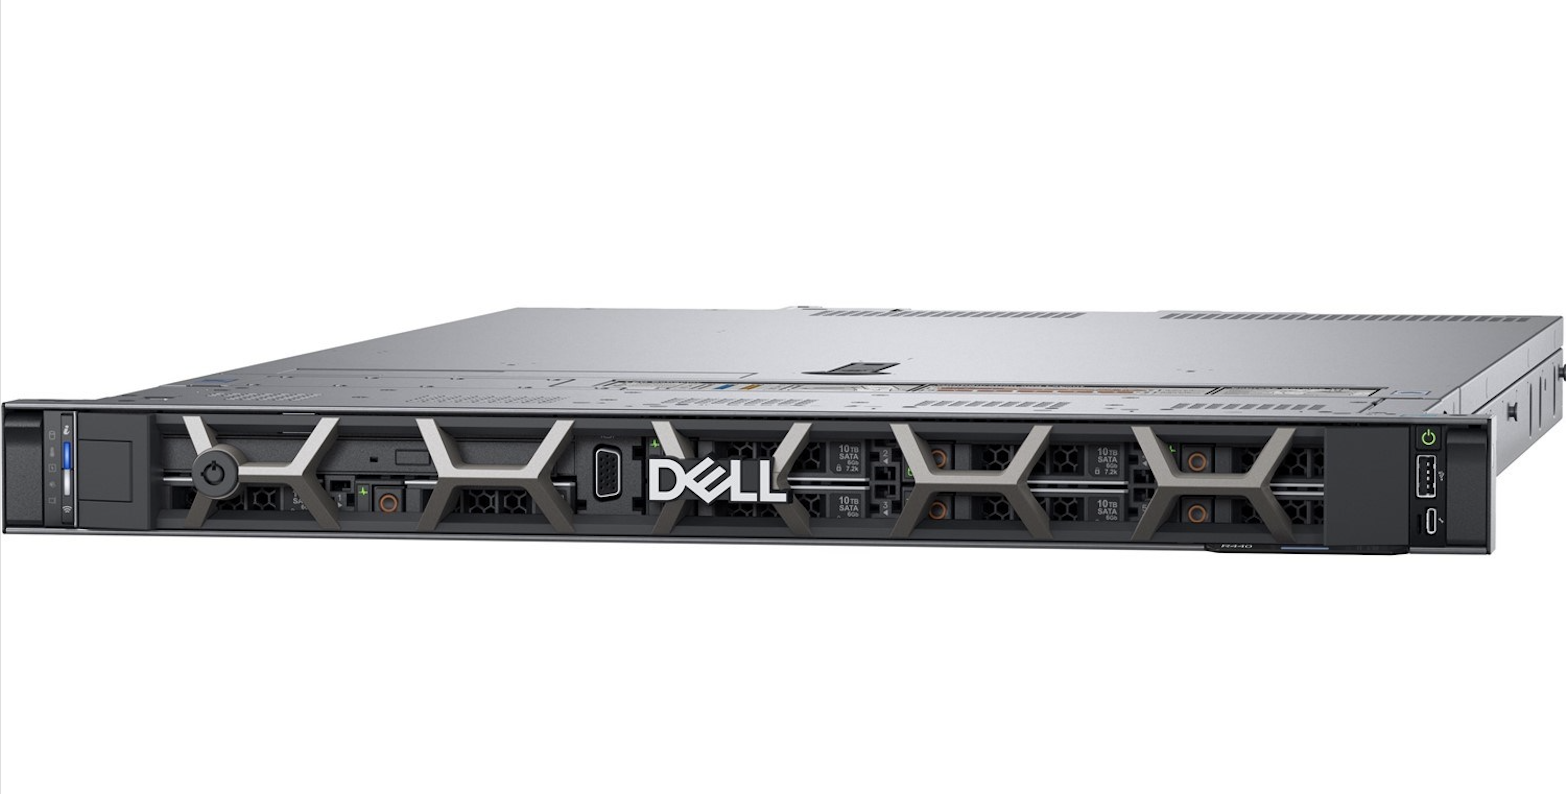 MÁY CHỦ DELL POWEREDGE R440 GOLD 6126 - 2.6G HDD 4x3.5IN 